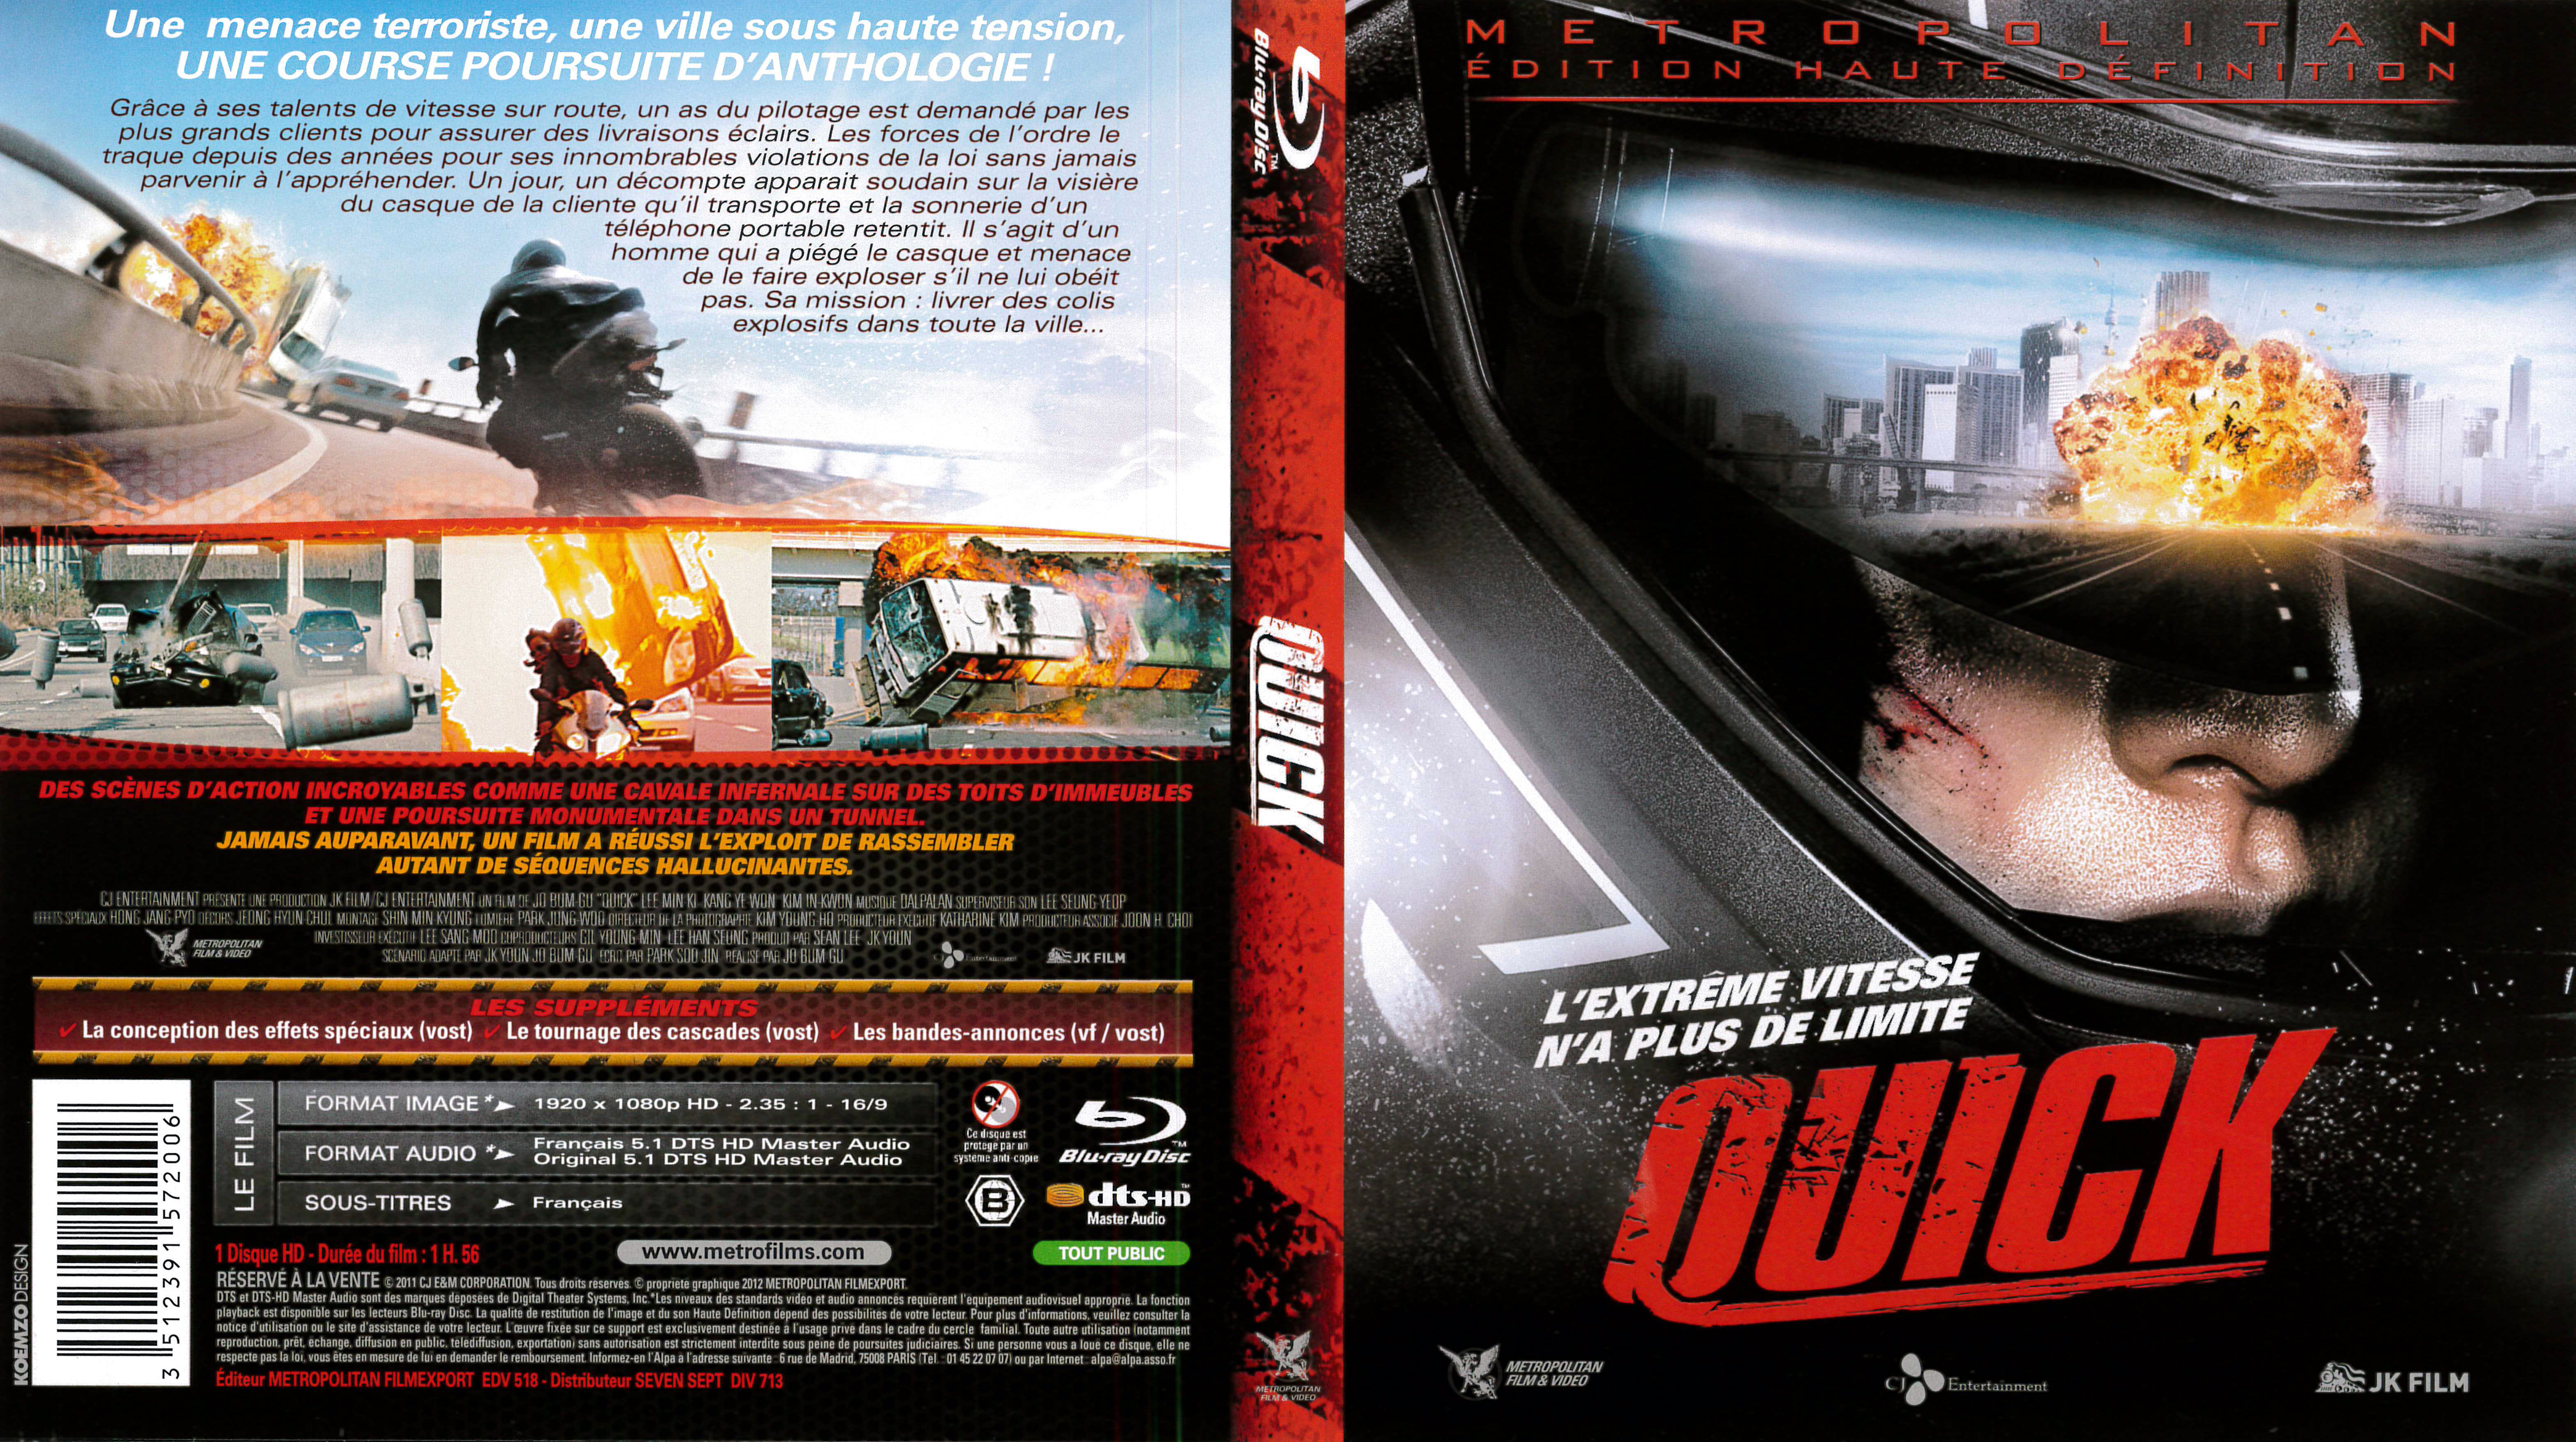 Jaquette DVD Quick (BLU-RAY)